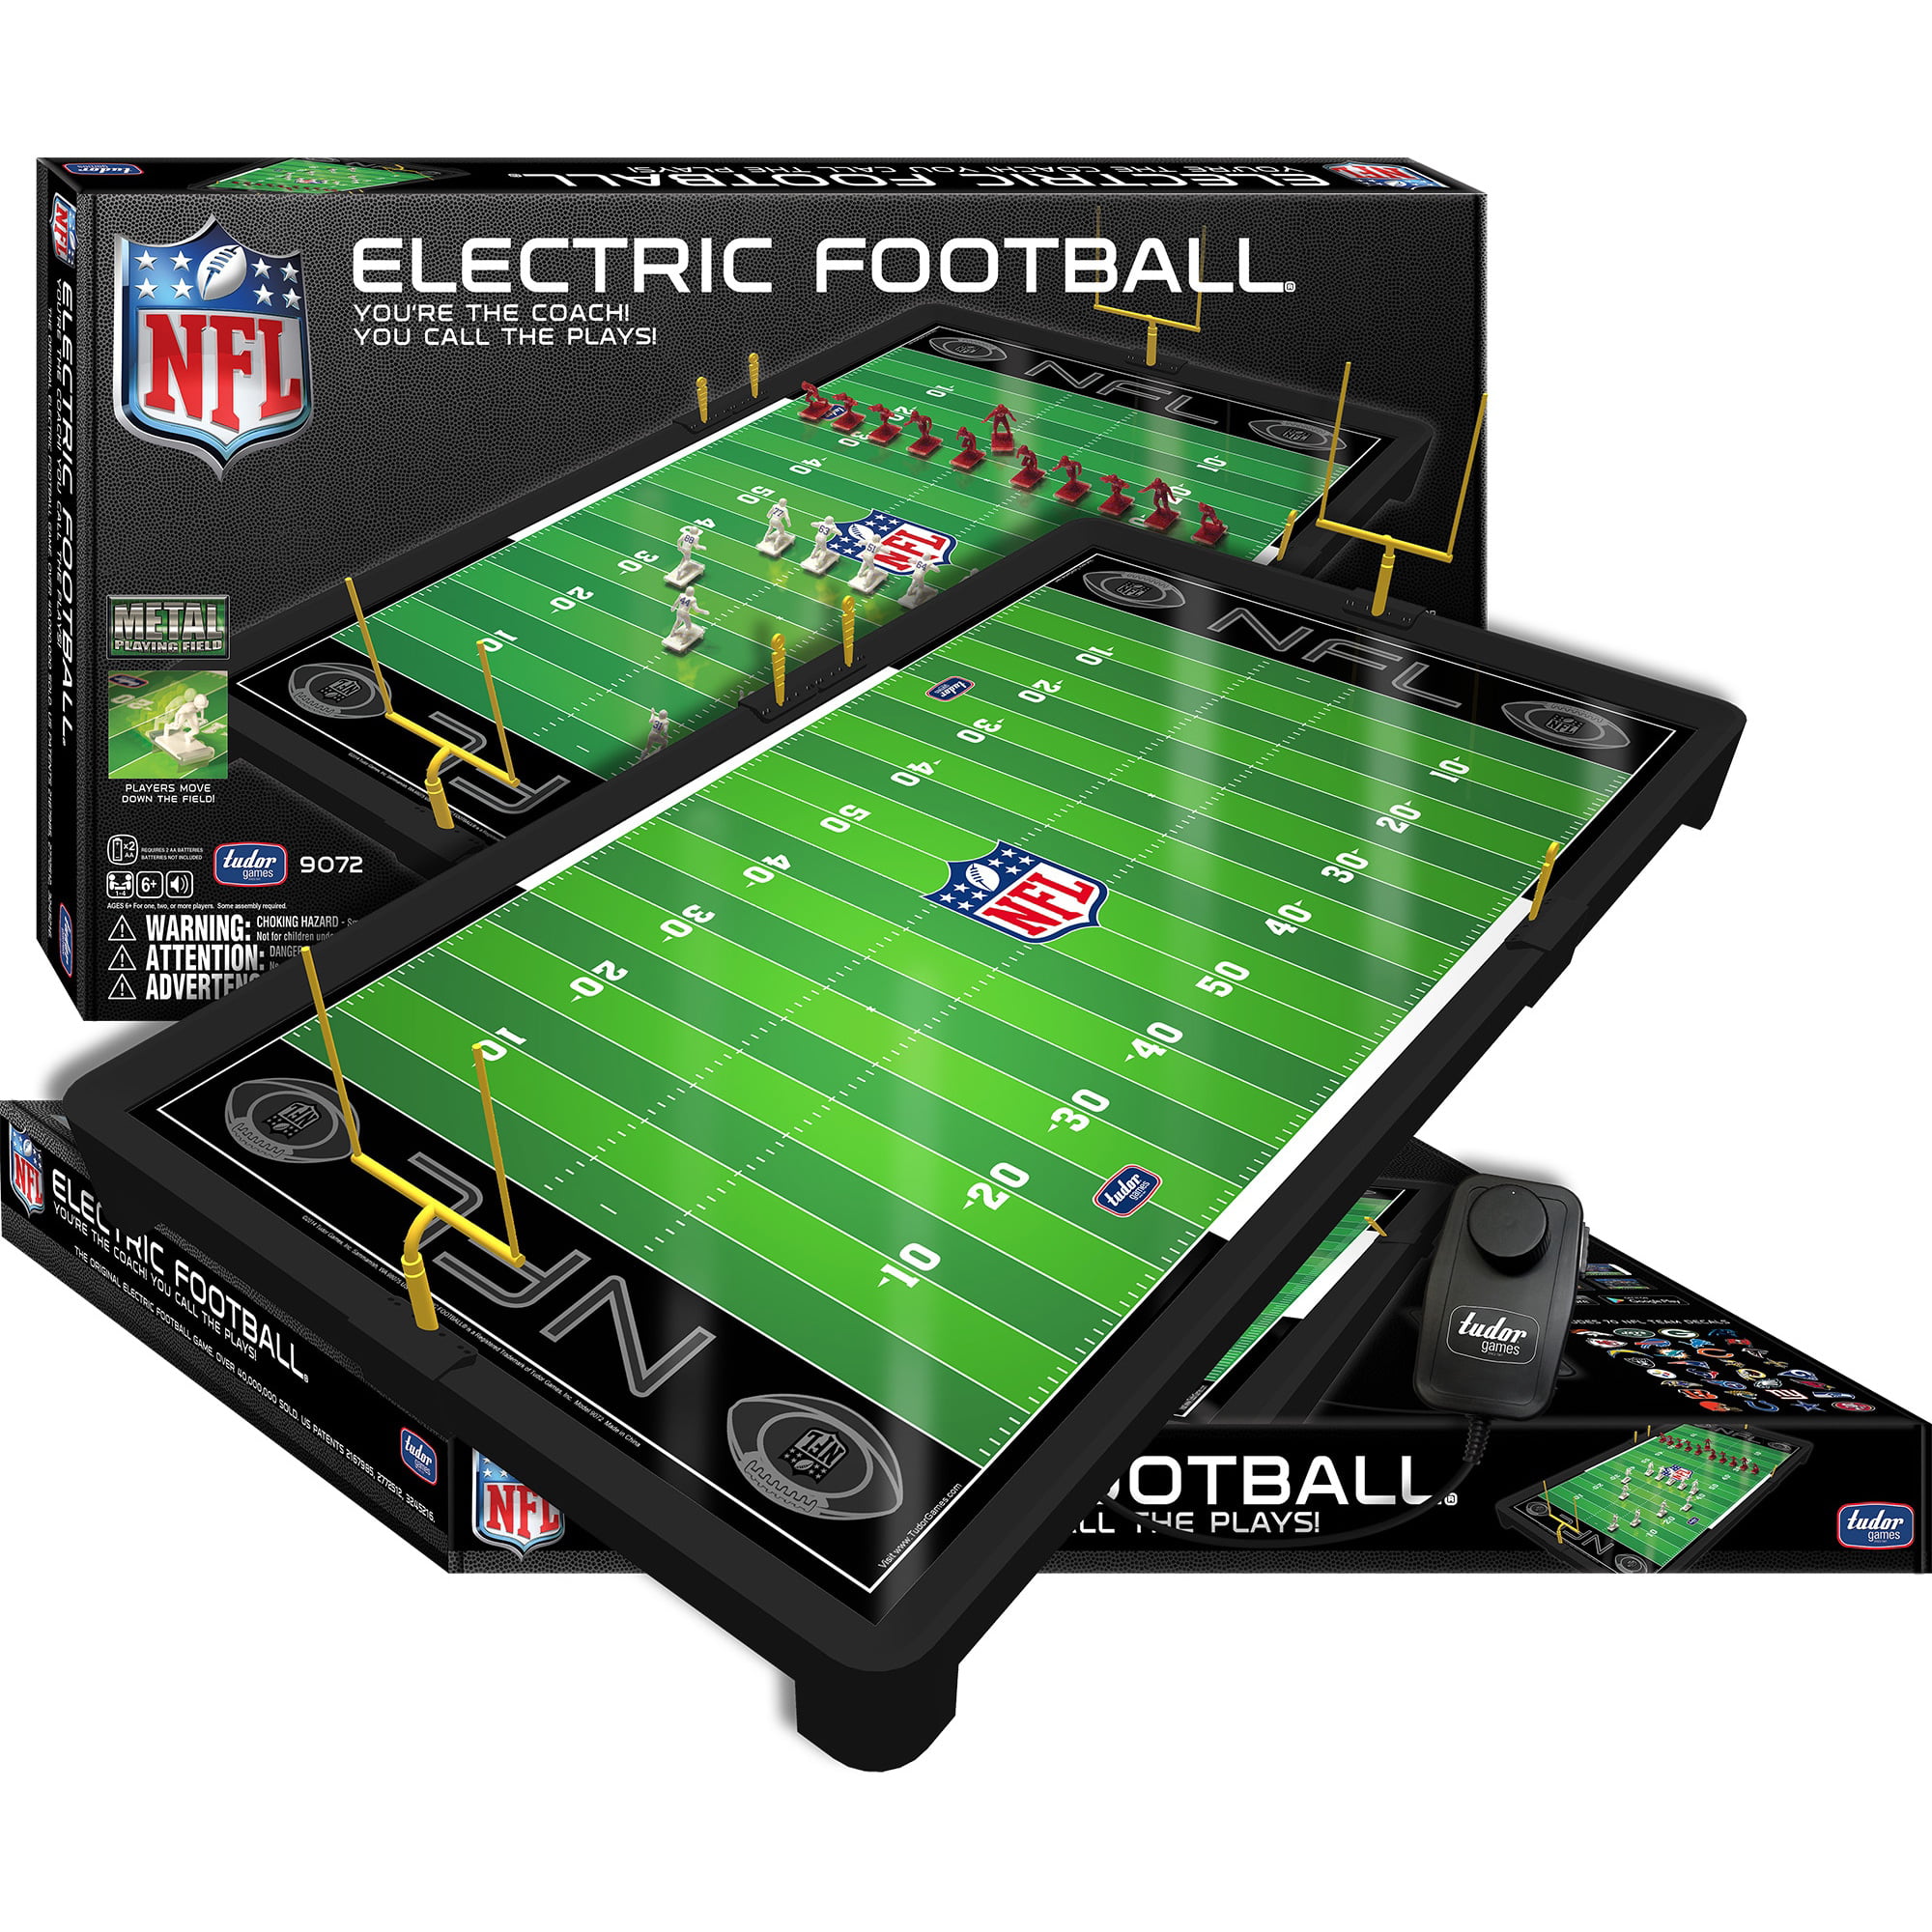 Tudor Games Electric Football Total Team Control Bases 48 Pack 